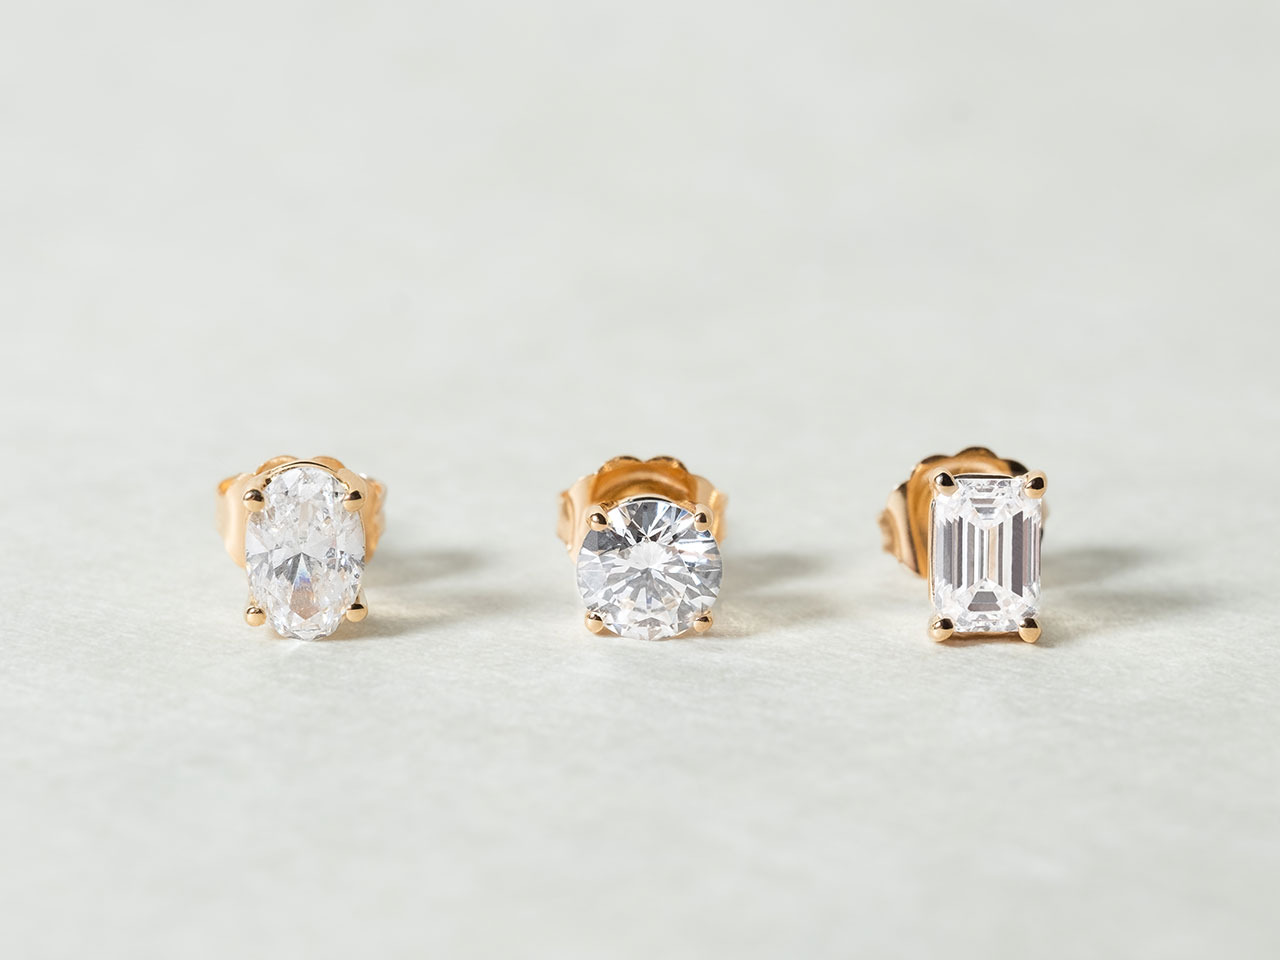 The Oval Diamond Stud, The Round Diamond Stud, and The Emerald Diamond Stud by Holden in yellow gold